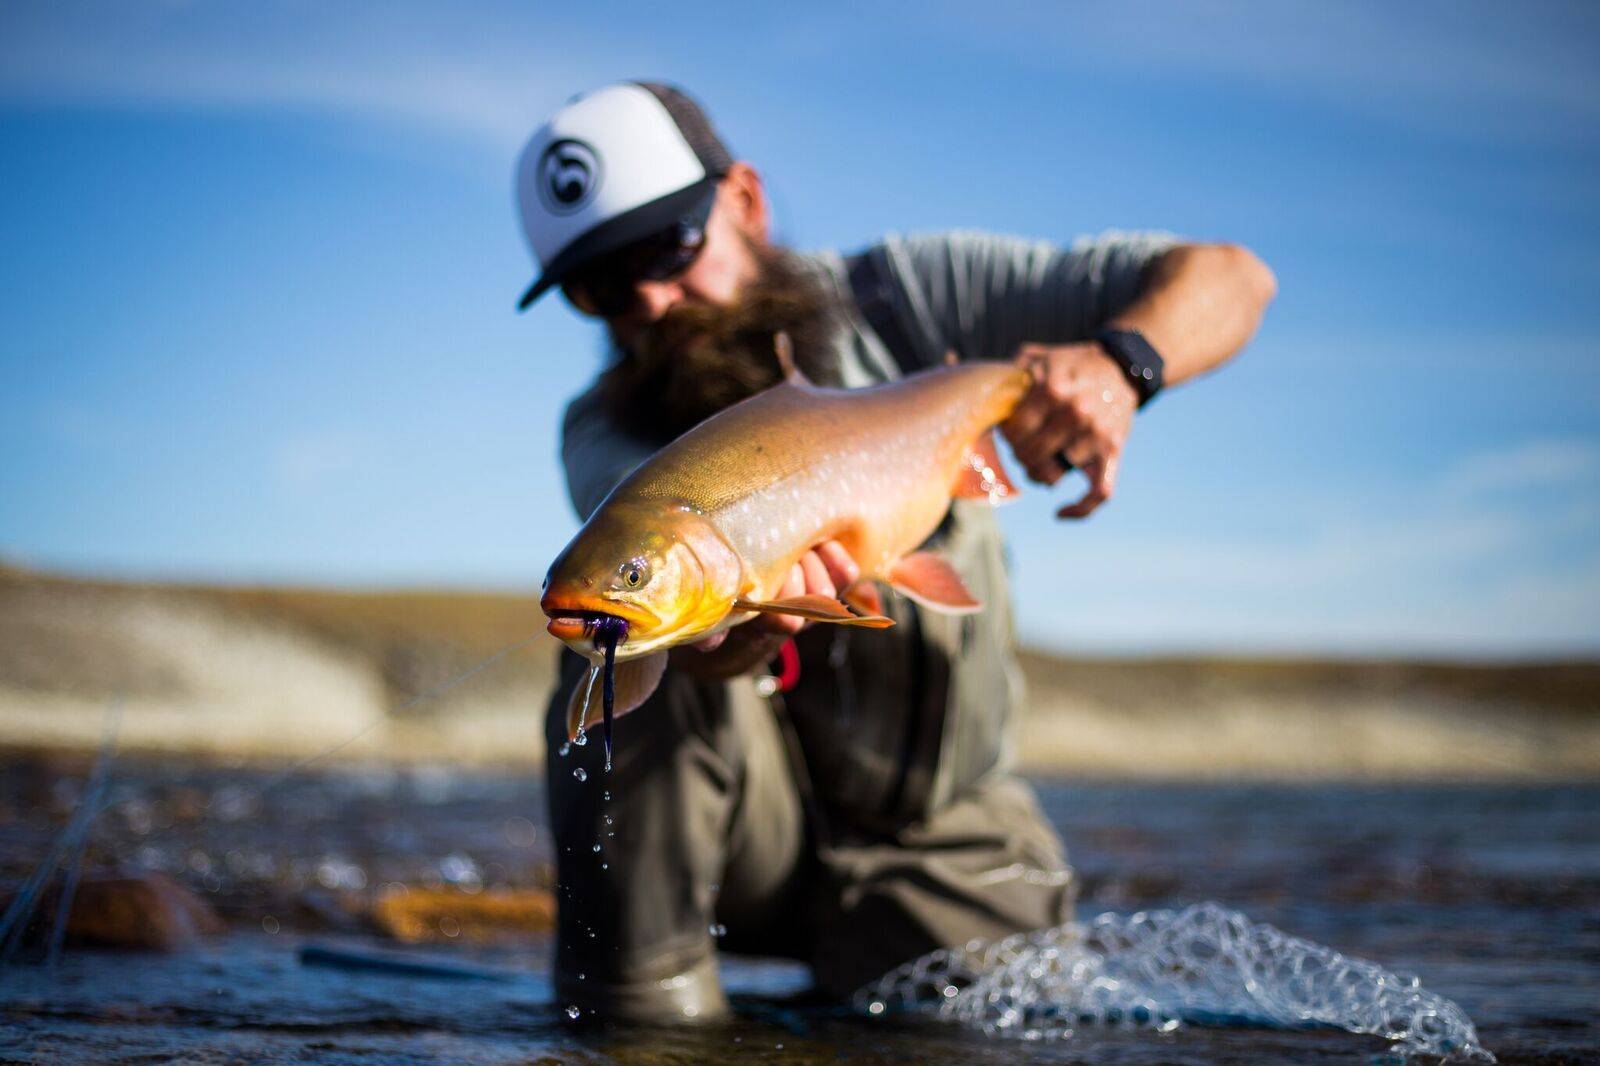 A still from the short film “Seriously North,” which will be playing at Saturday’s International Fly Fishing Festival in Kenai. (Photo Courtesy of Bird Marketing Group)